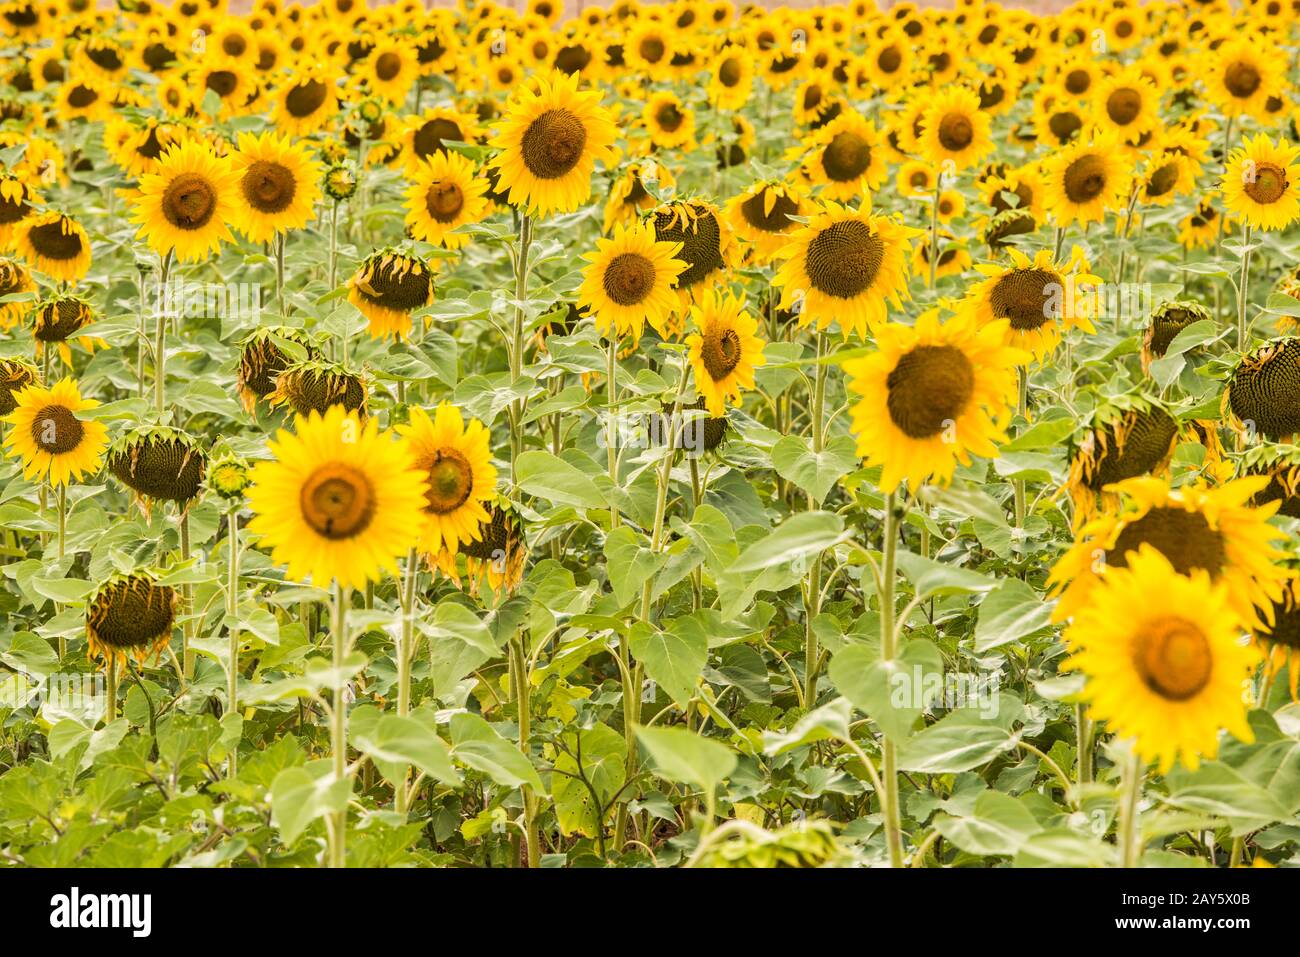 Close up view of a bright yellow sunflower field Stock Photo